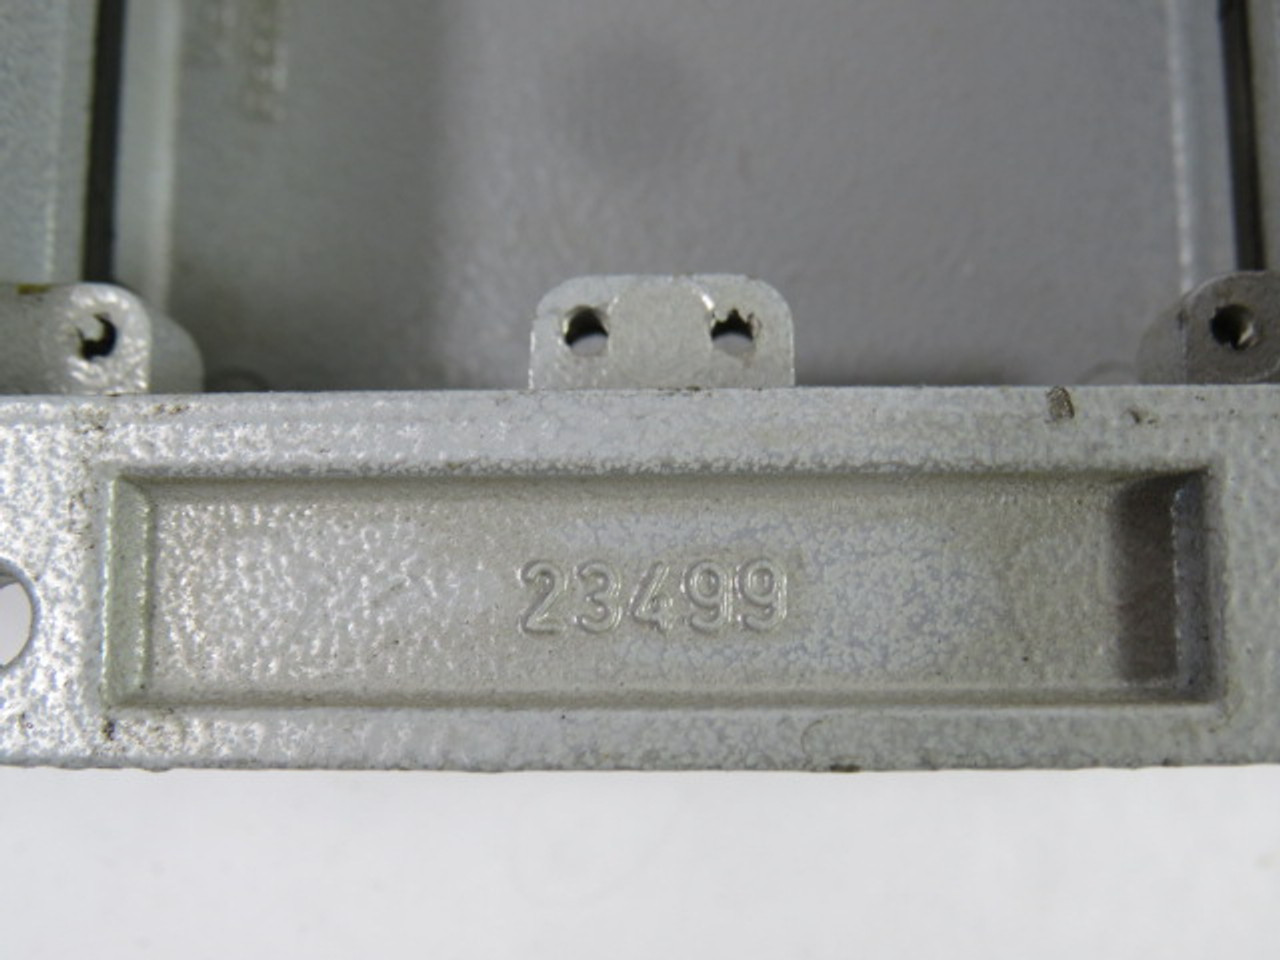 Mencom 23499 Connector Enclosure With Gasket USED